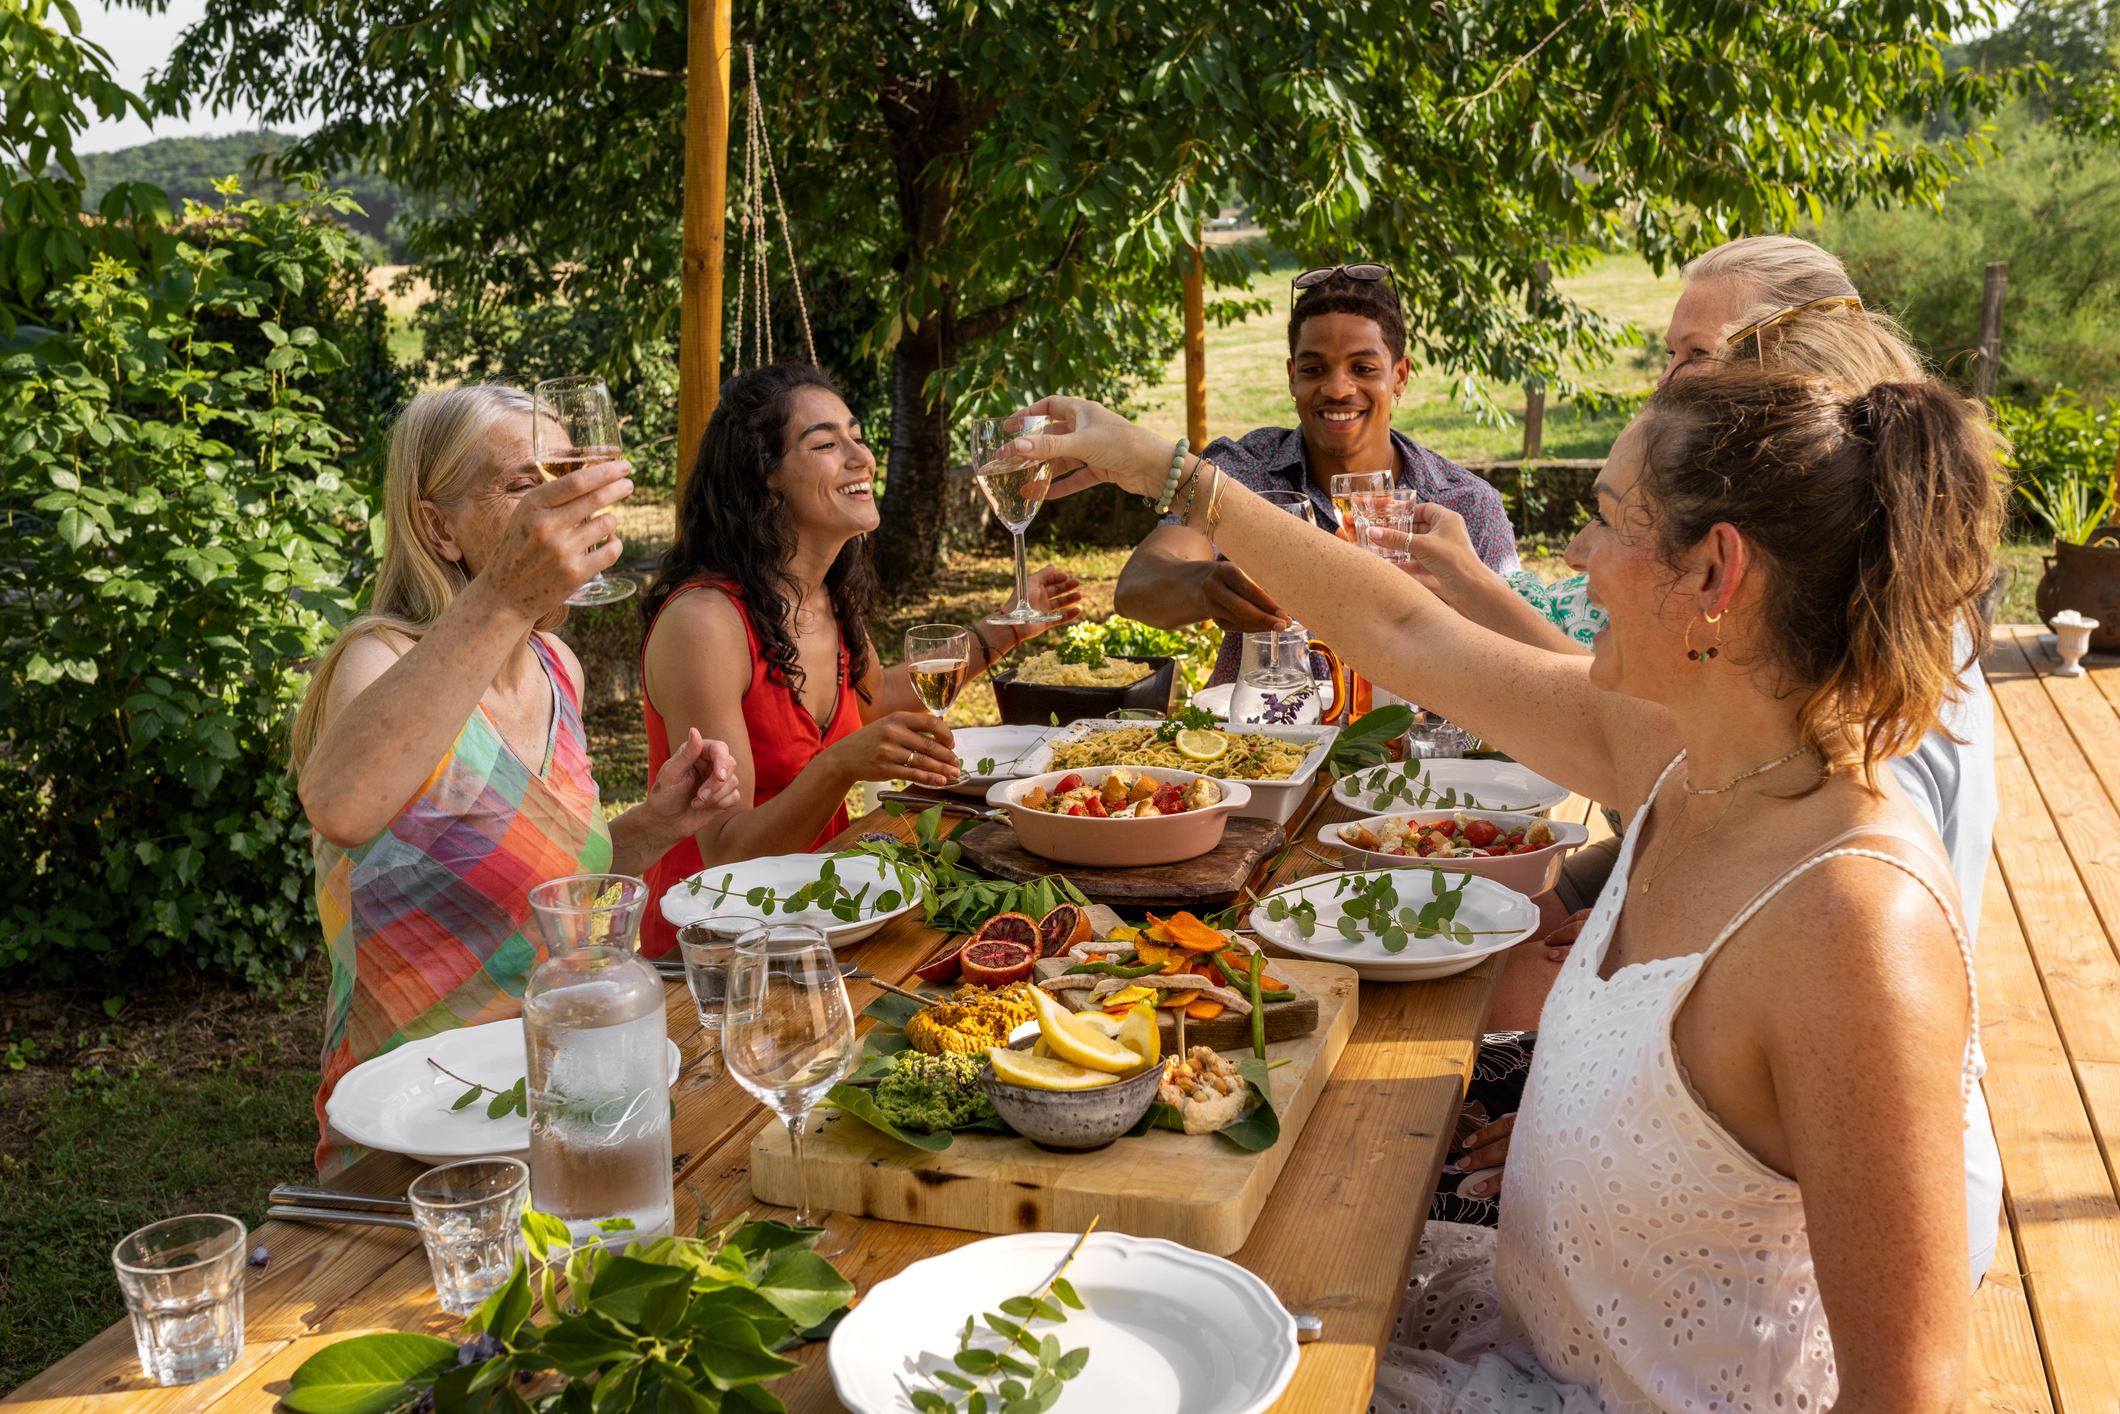 Why customers are a go, for dining Alfresco